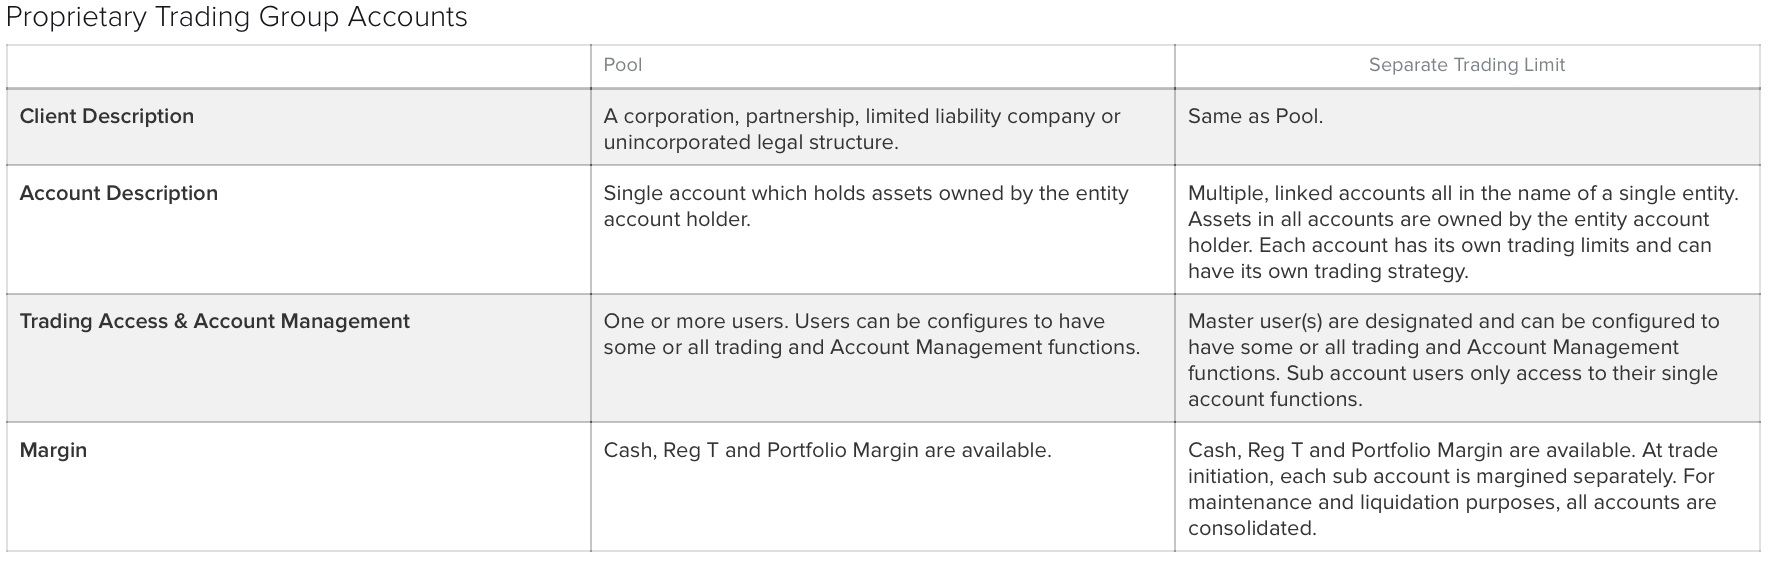 Account details of the Proprietary Trading Group Account on Interactive brokers